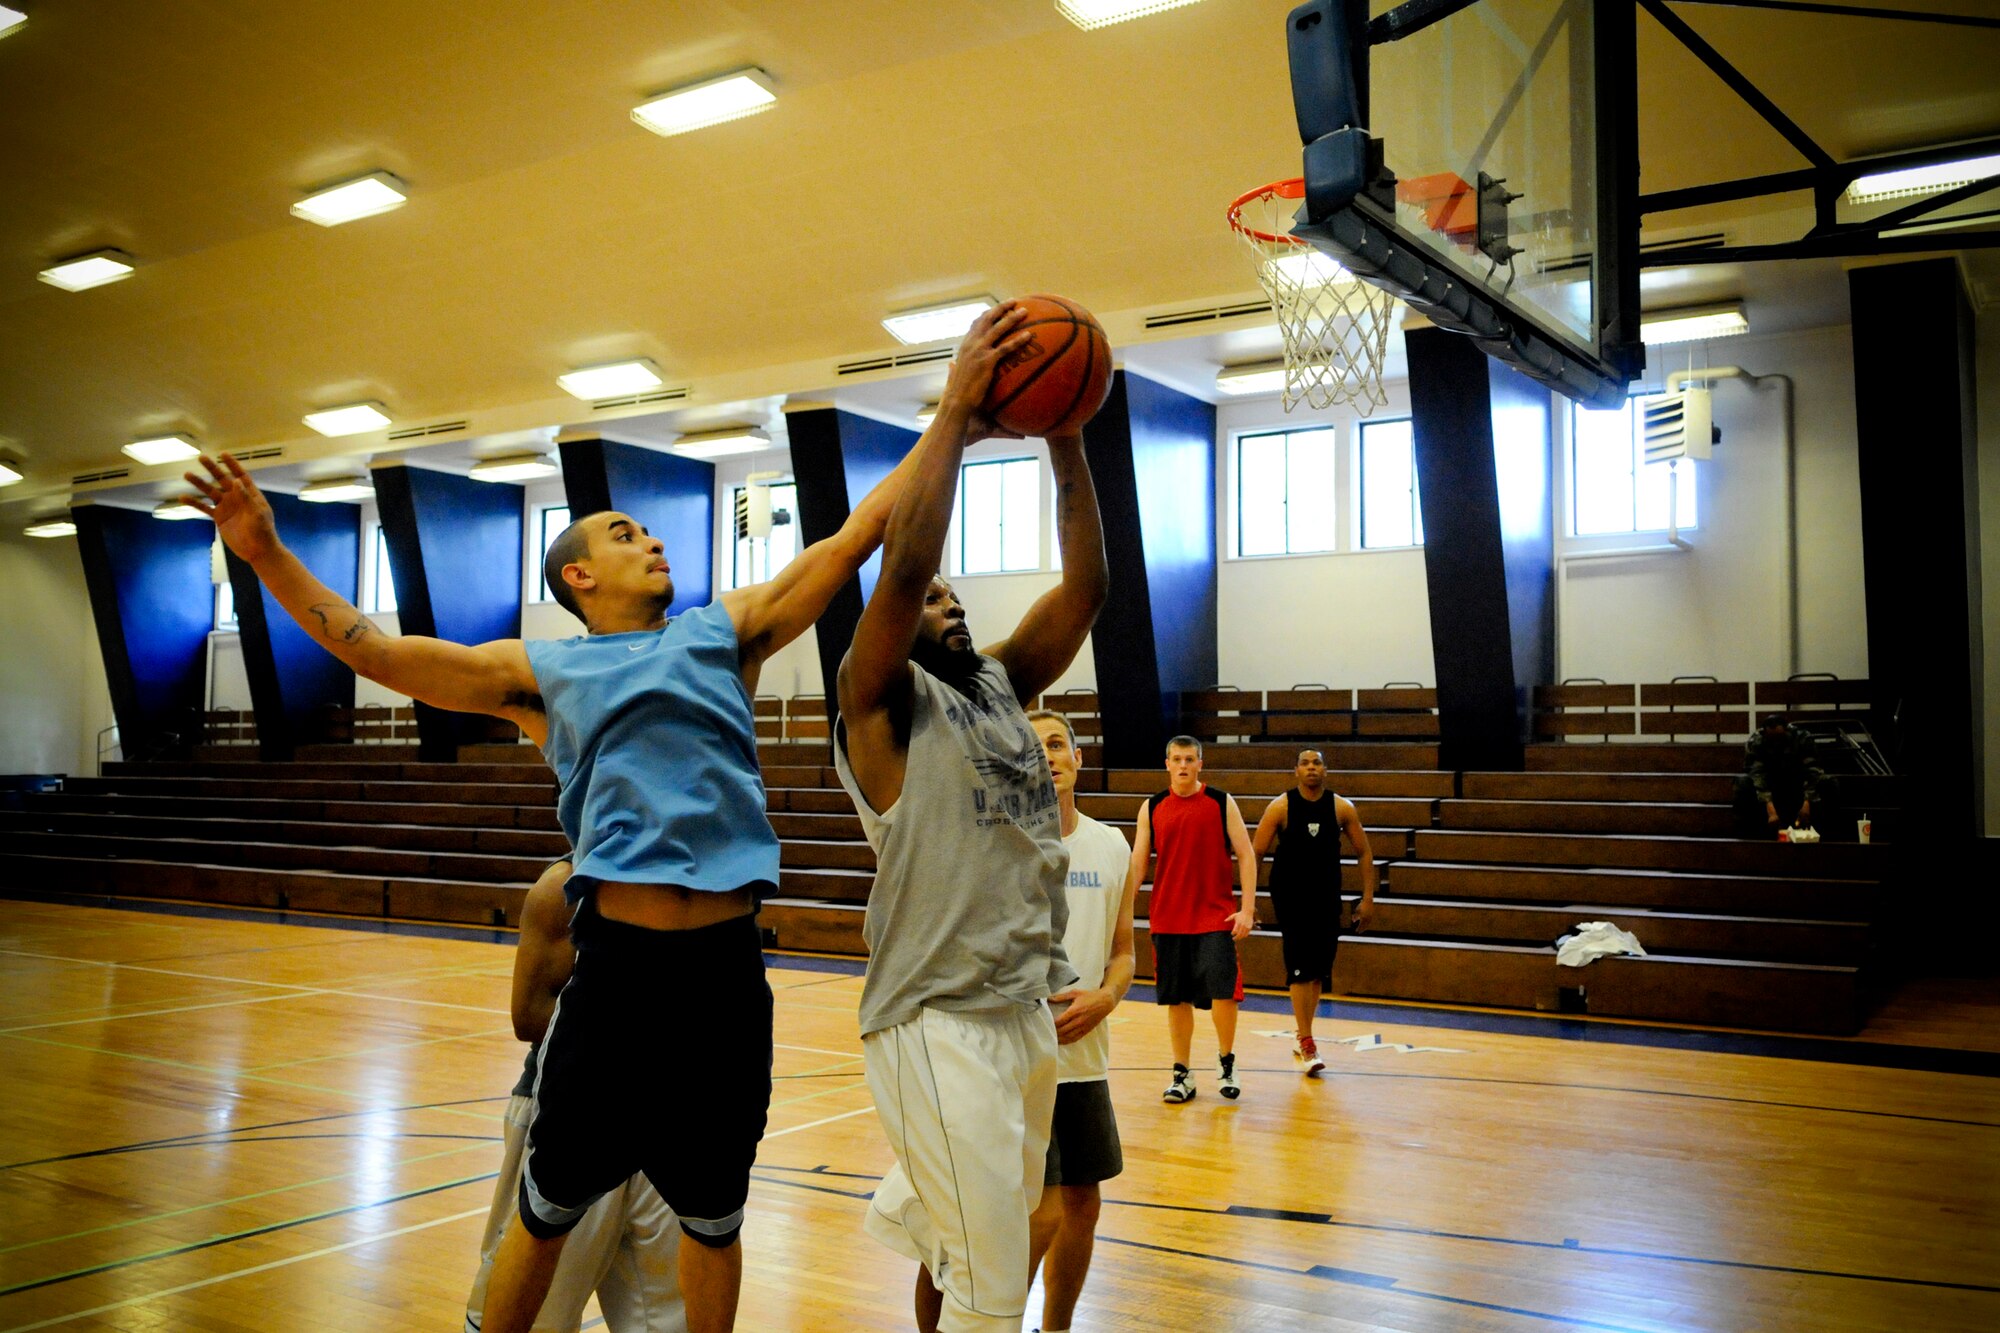 MISAWA AIR BASE, Japan -- Ricardo Perez, left, and Derreck Curtis, right, battle for a rebound during a 3-on-3 basketball tournament at the Potter Fitness Center May 27, 2009. Perez's team finished the tournament in third place while Curtis' team took top honors. (U.S. Air Force photo by Senior Airman Jamal D. Sutter)